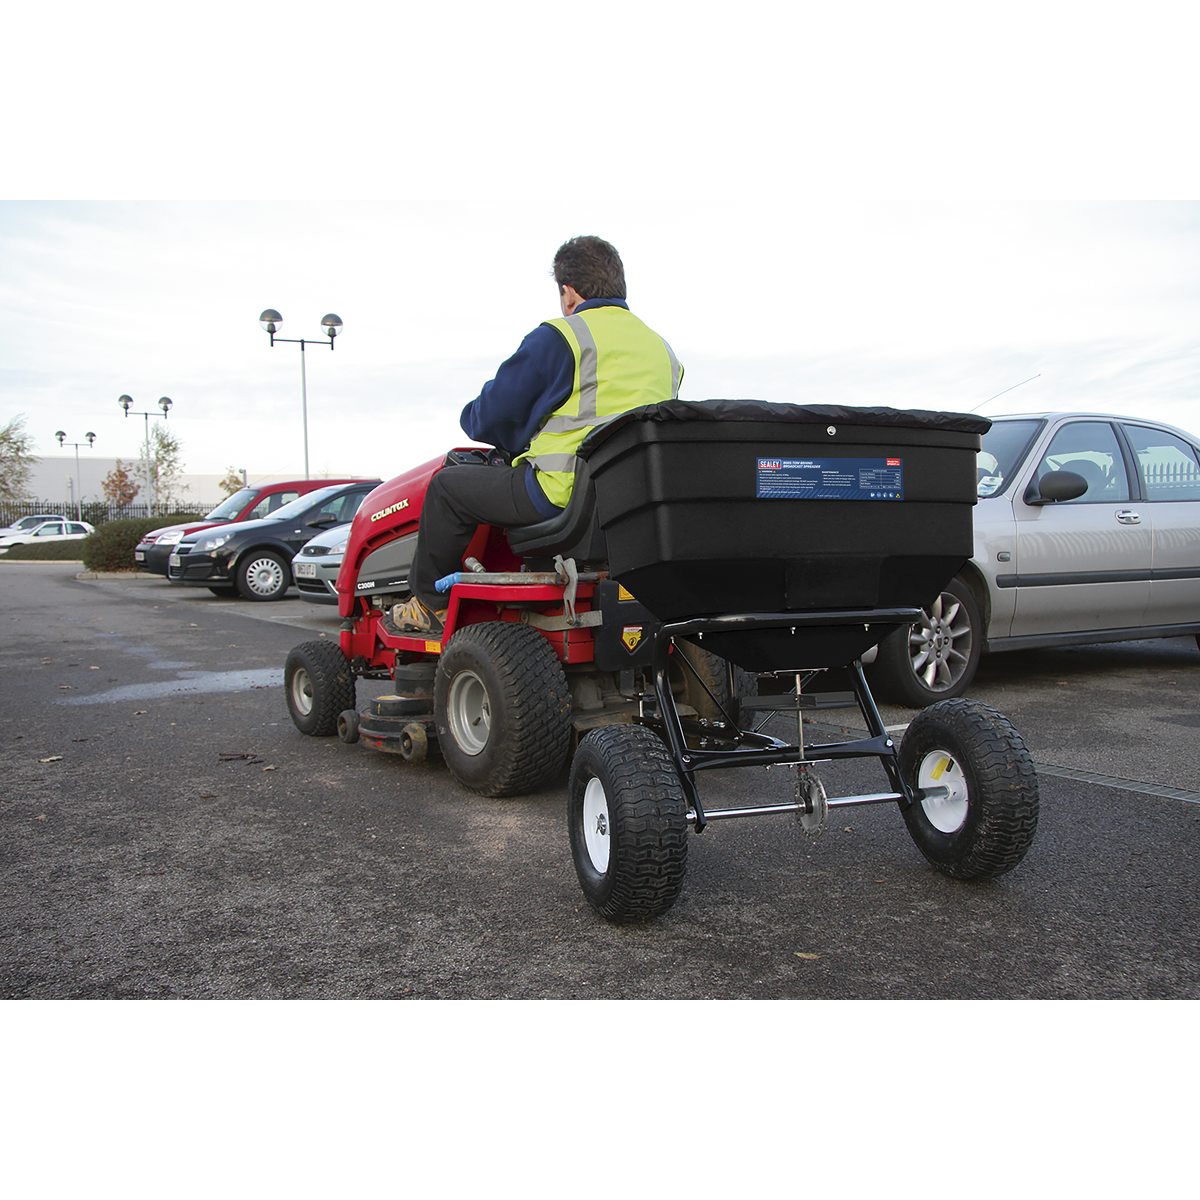 Sealey spreader can be attached to lawnmower